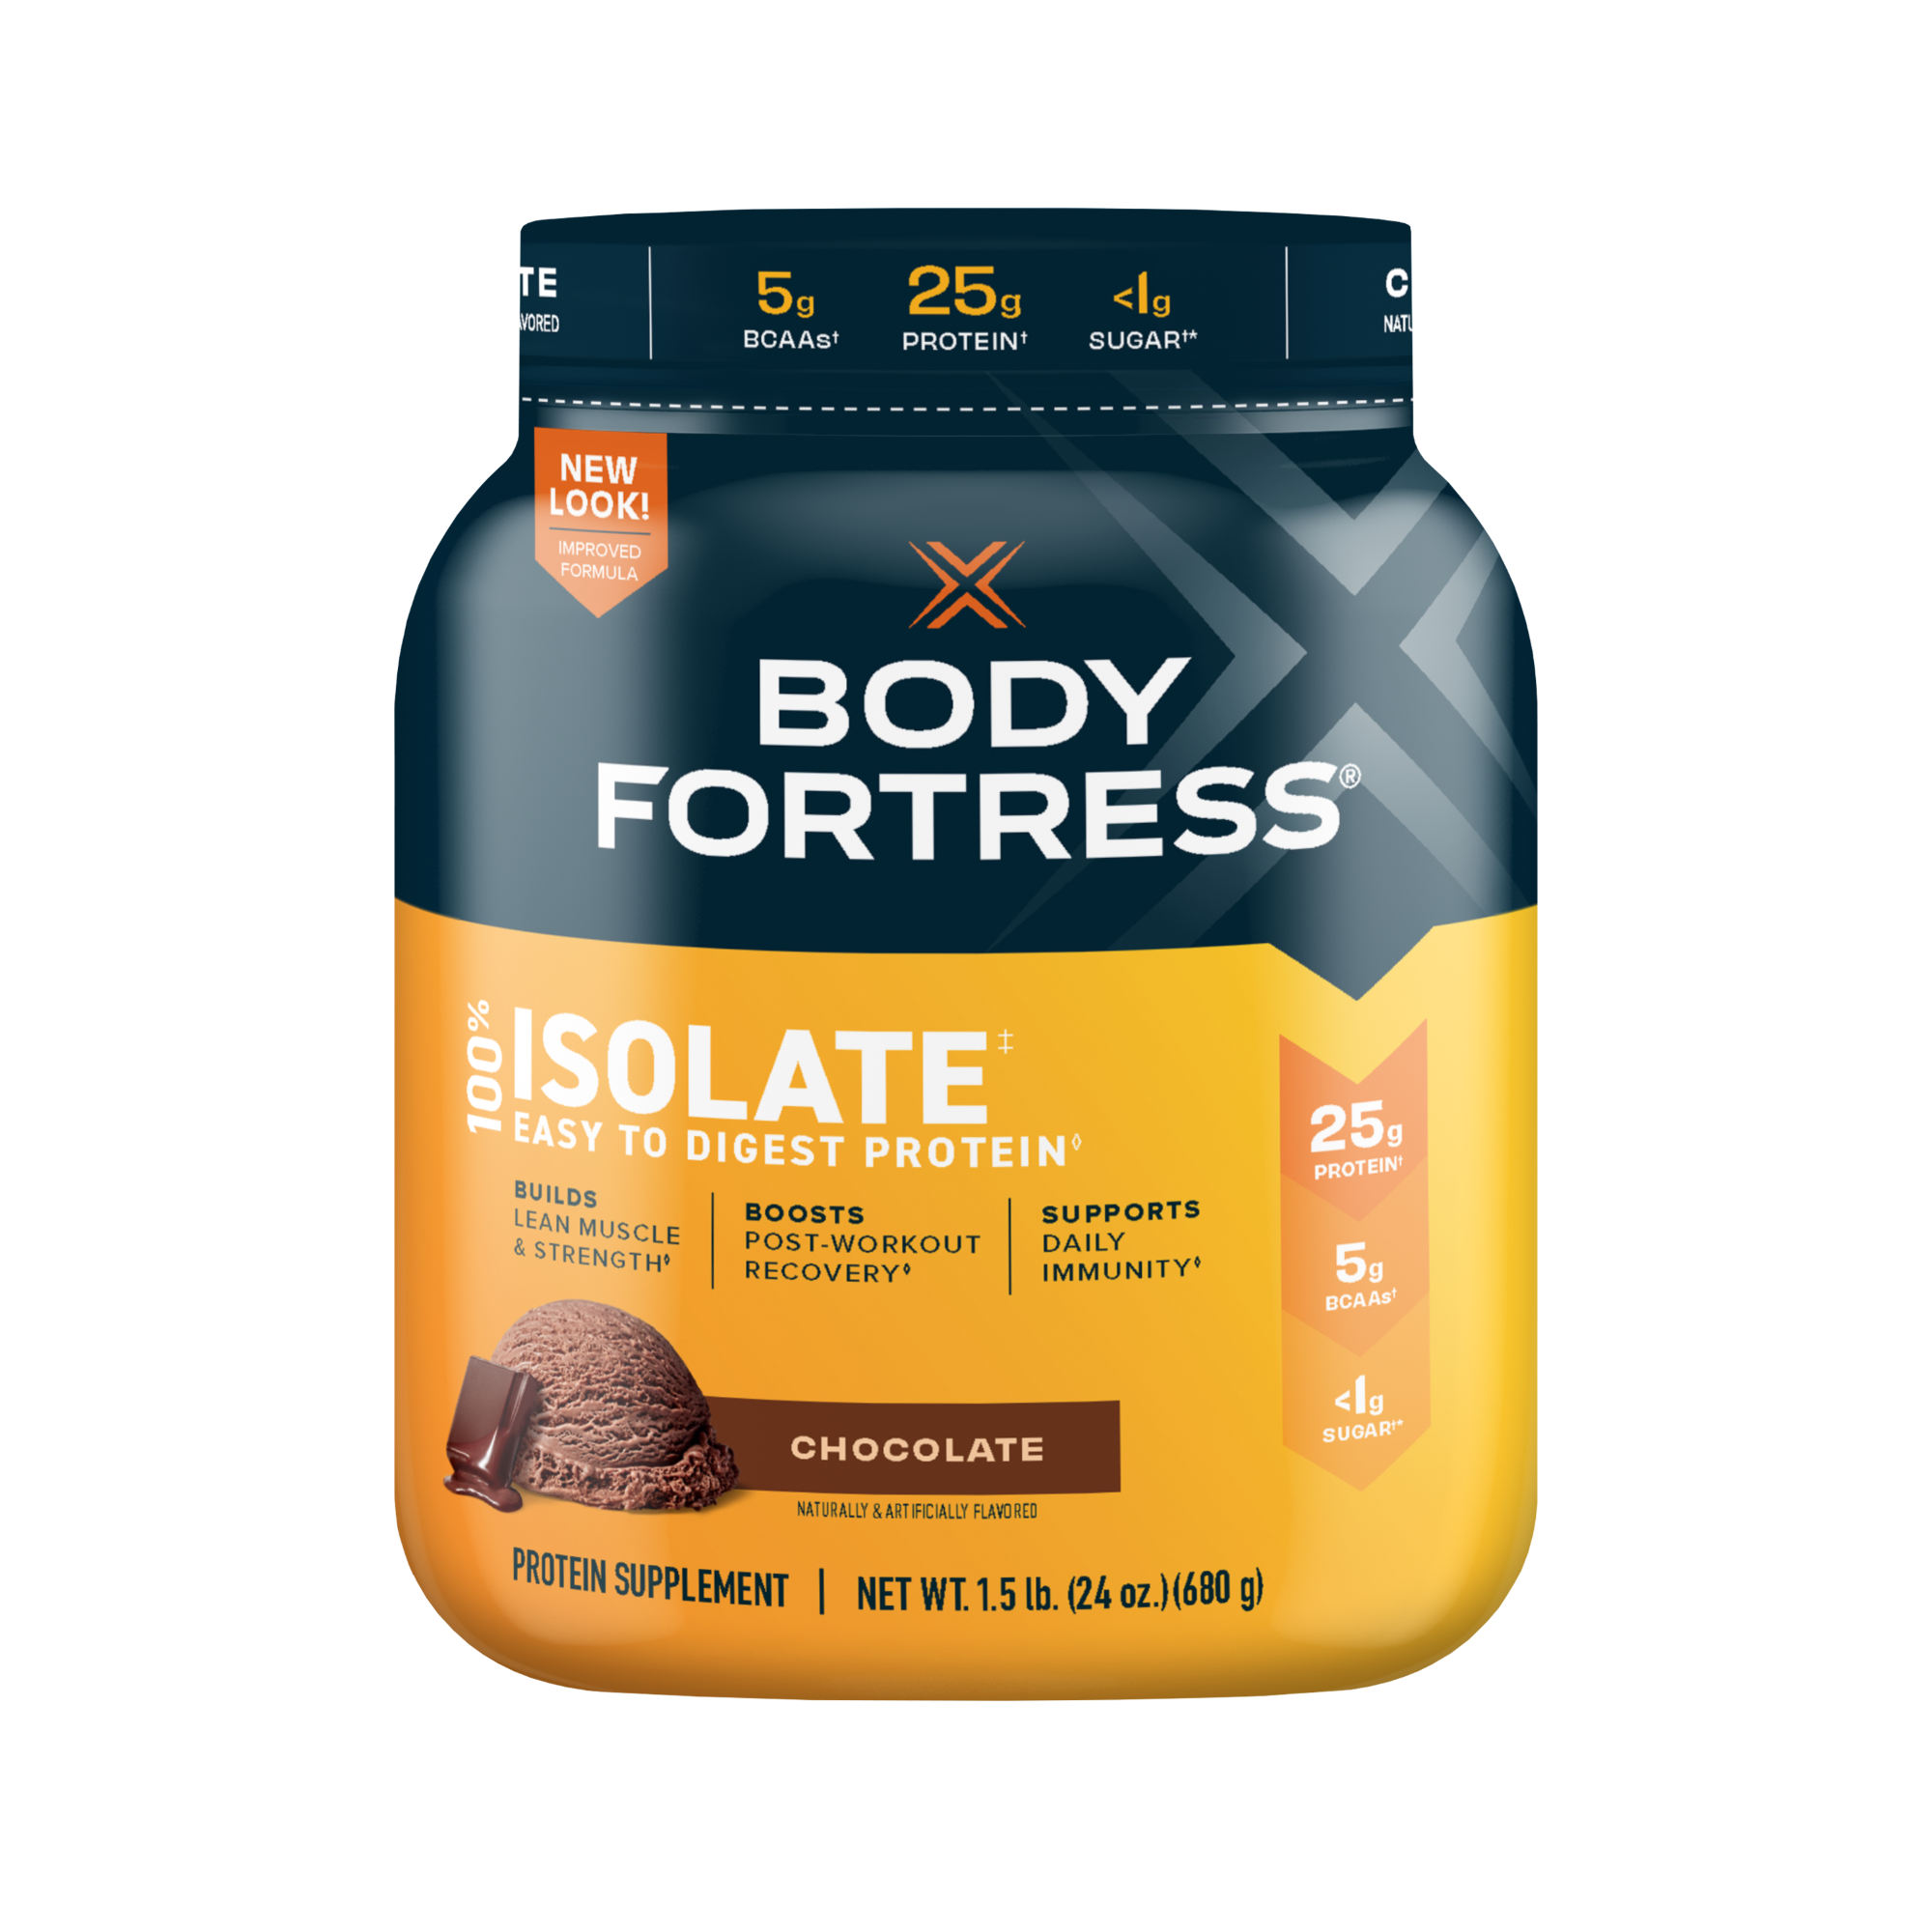 Body Fortress 100% Isolate Easy-to-Digest Protein Powder, Chocolate, 1.5lbs - image 1 of 8